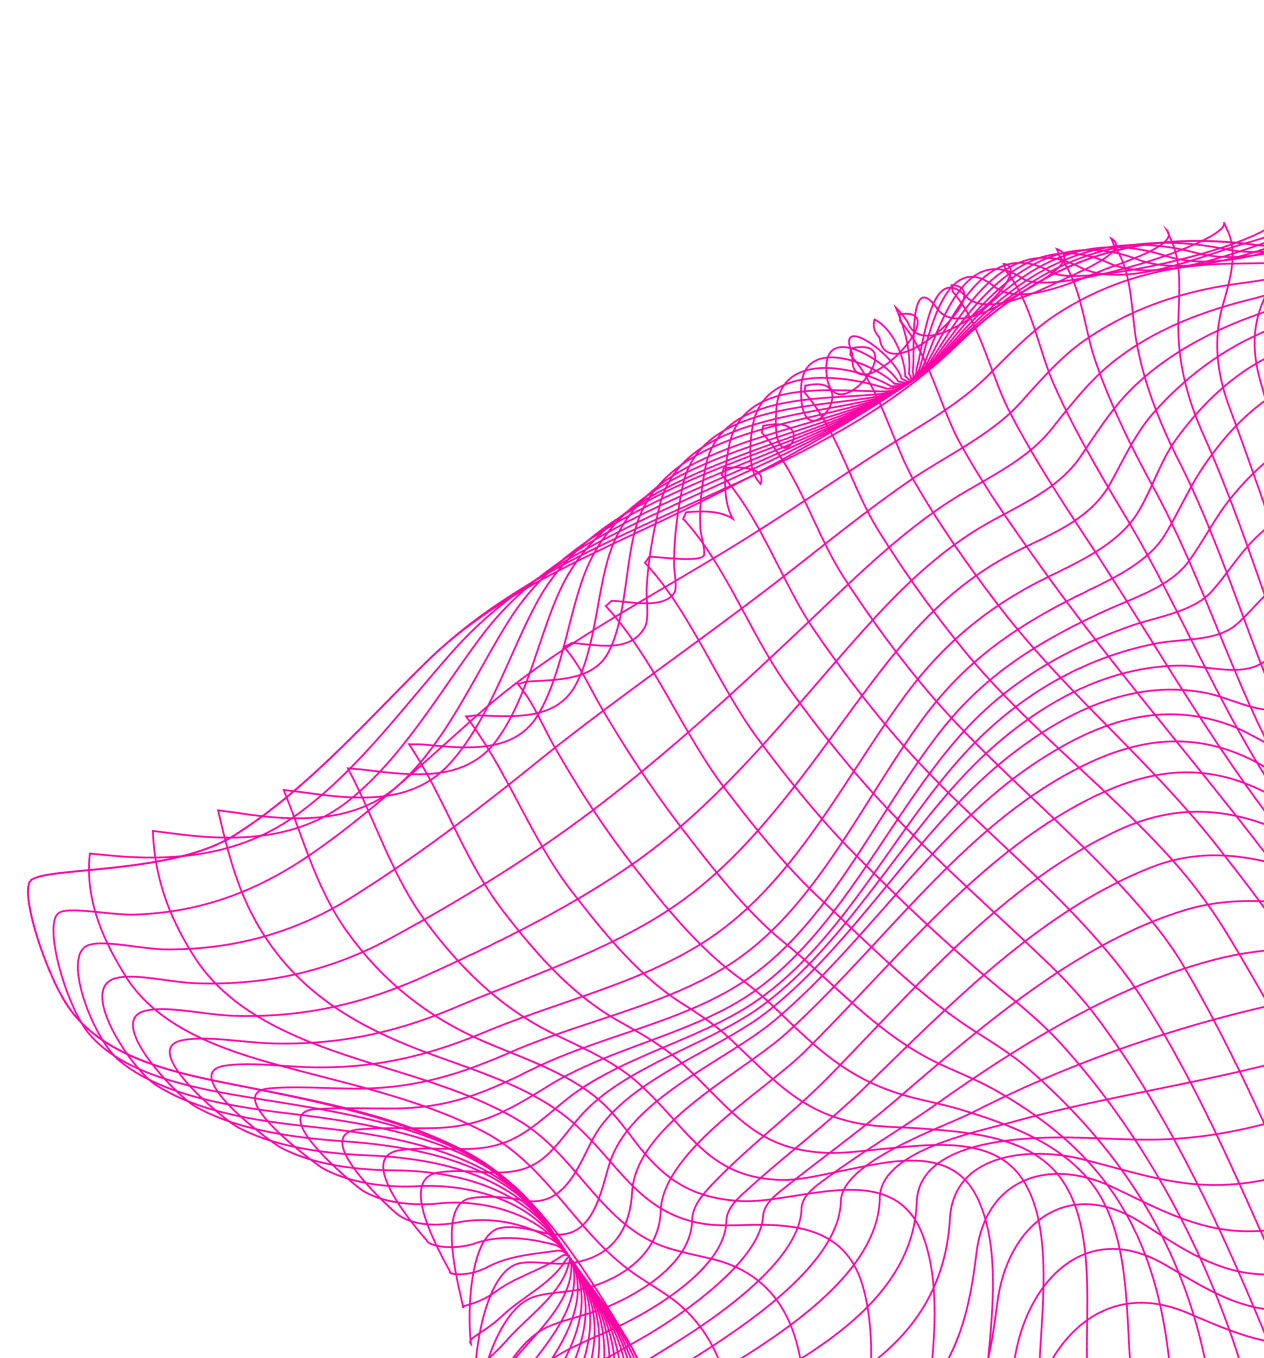 Mesh pink as detail for background